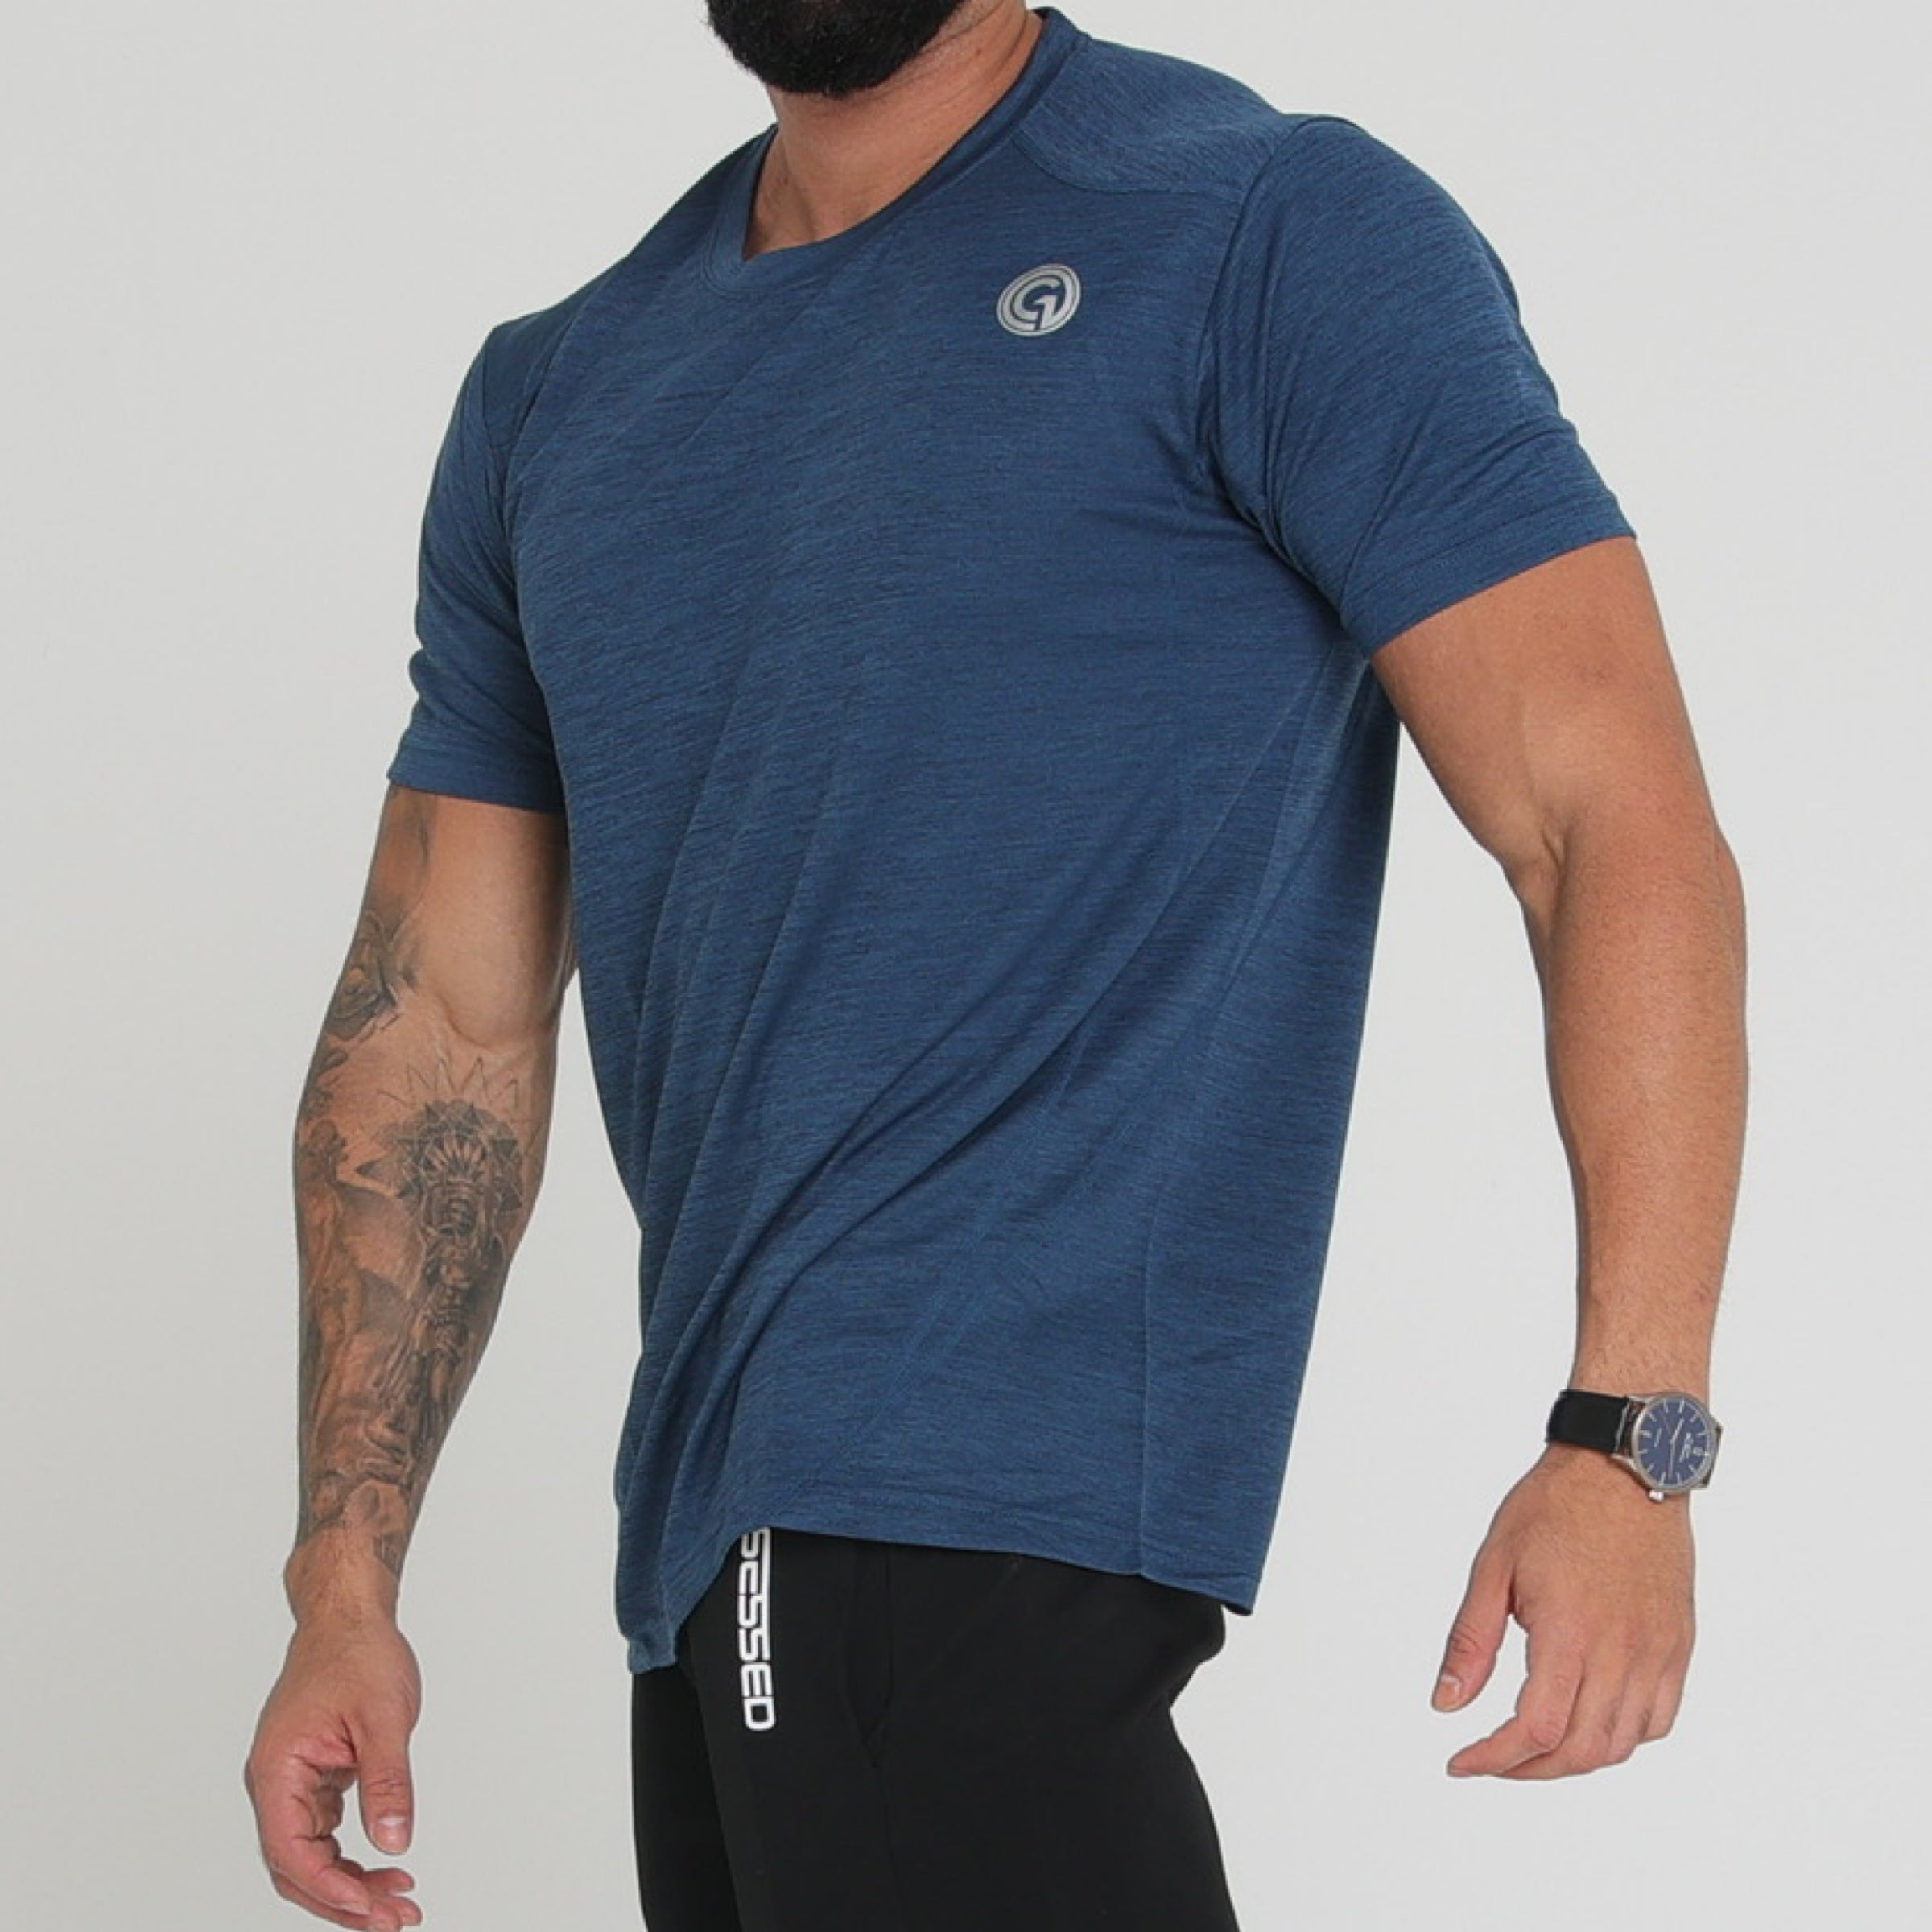 ADAPT QUICK DRY T-SHIRT - TEAL